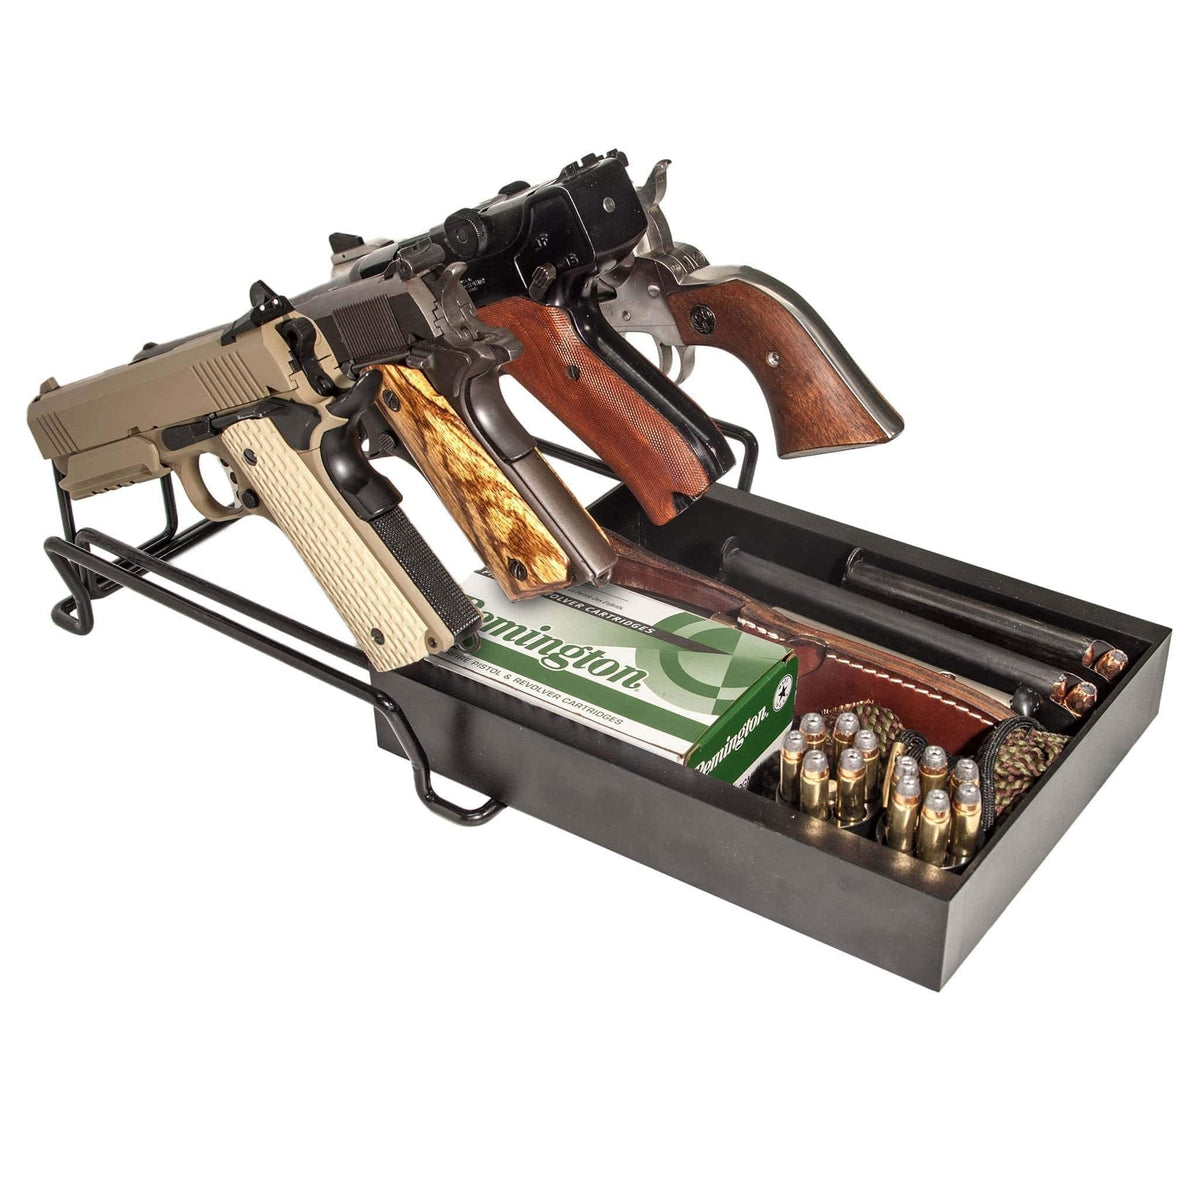 Liberty 10956 4 Gun Pistol Rack with Slide Out Drawer